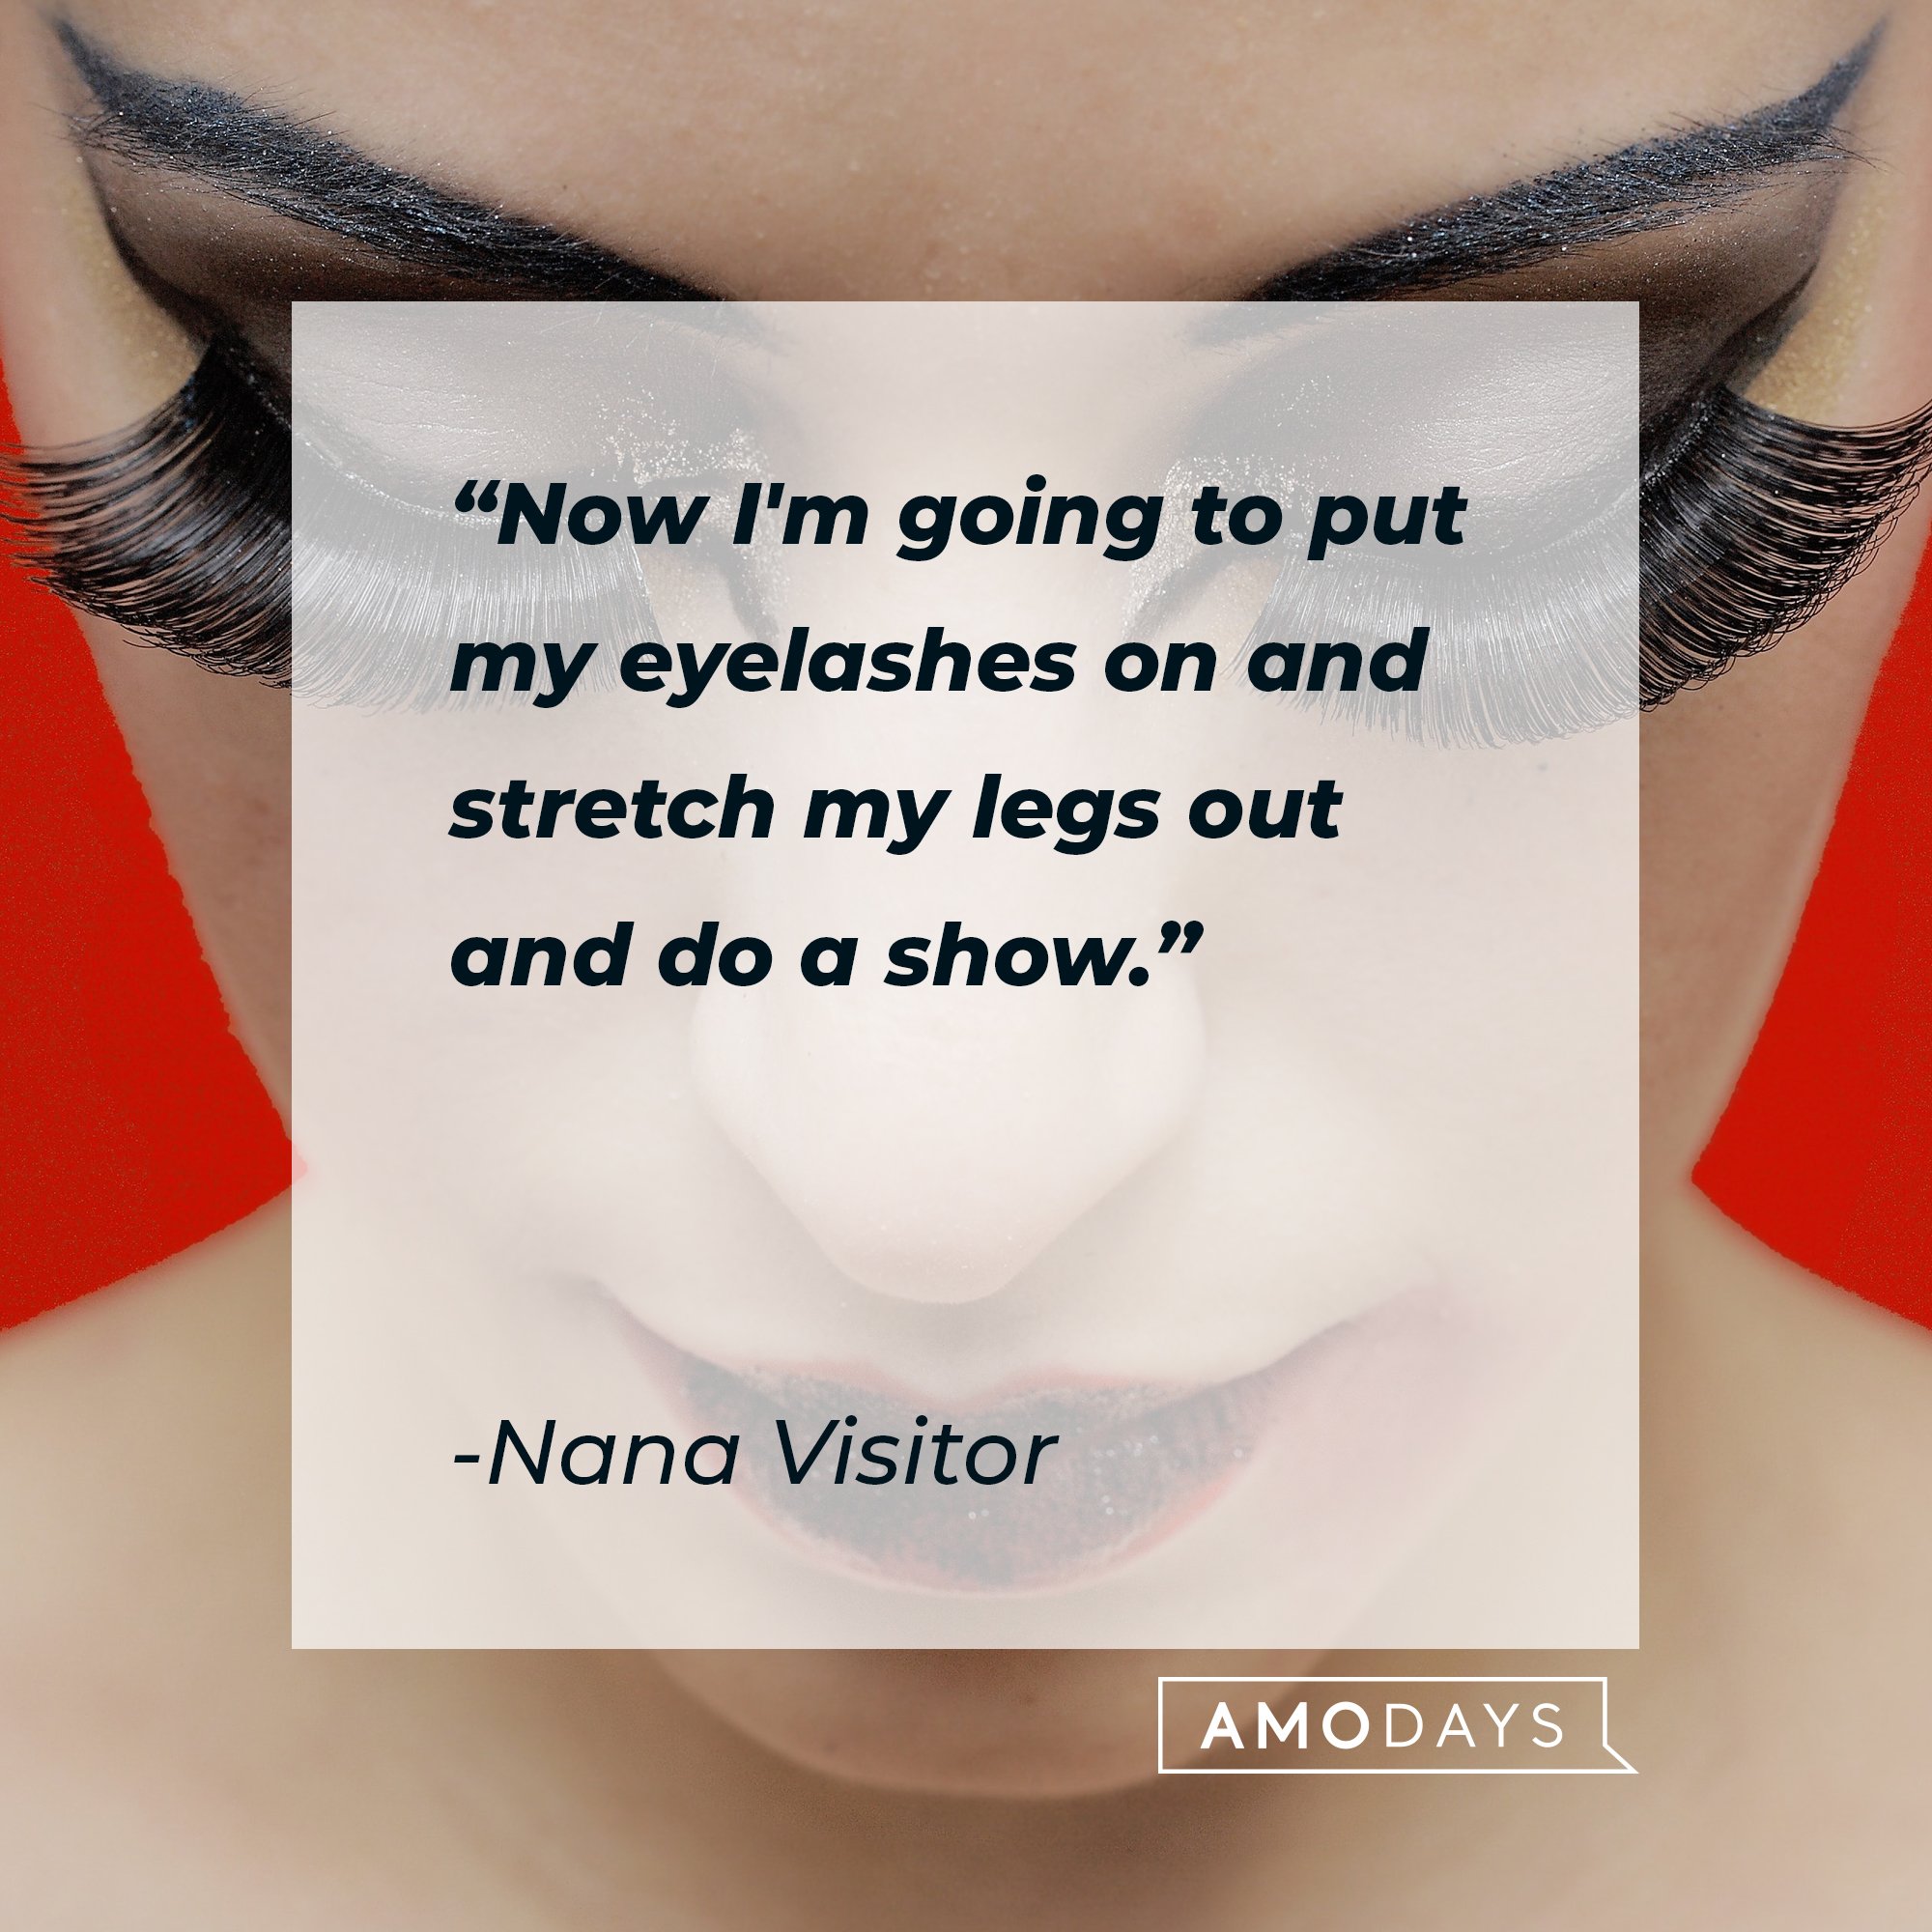 Nana Visitor’s quote: "Now I'm going to put my eyelashes on and stretch my legs out and do a show." | Image: AmoDays